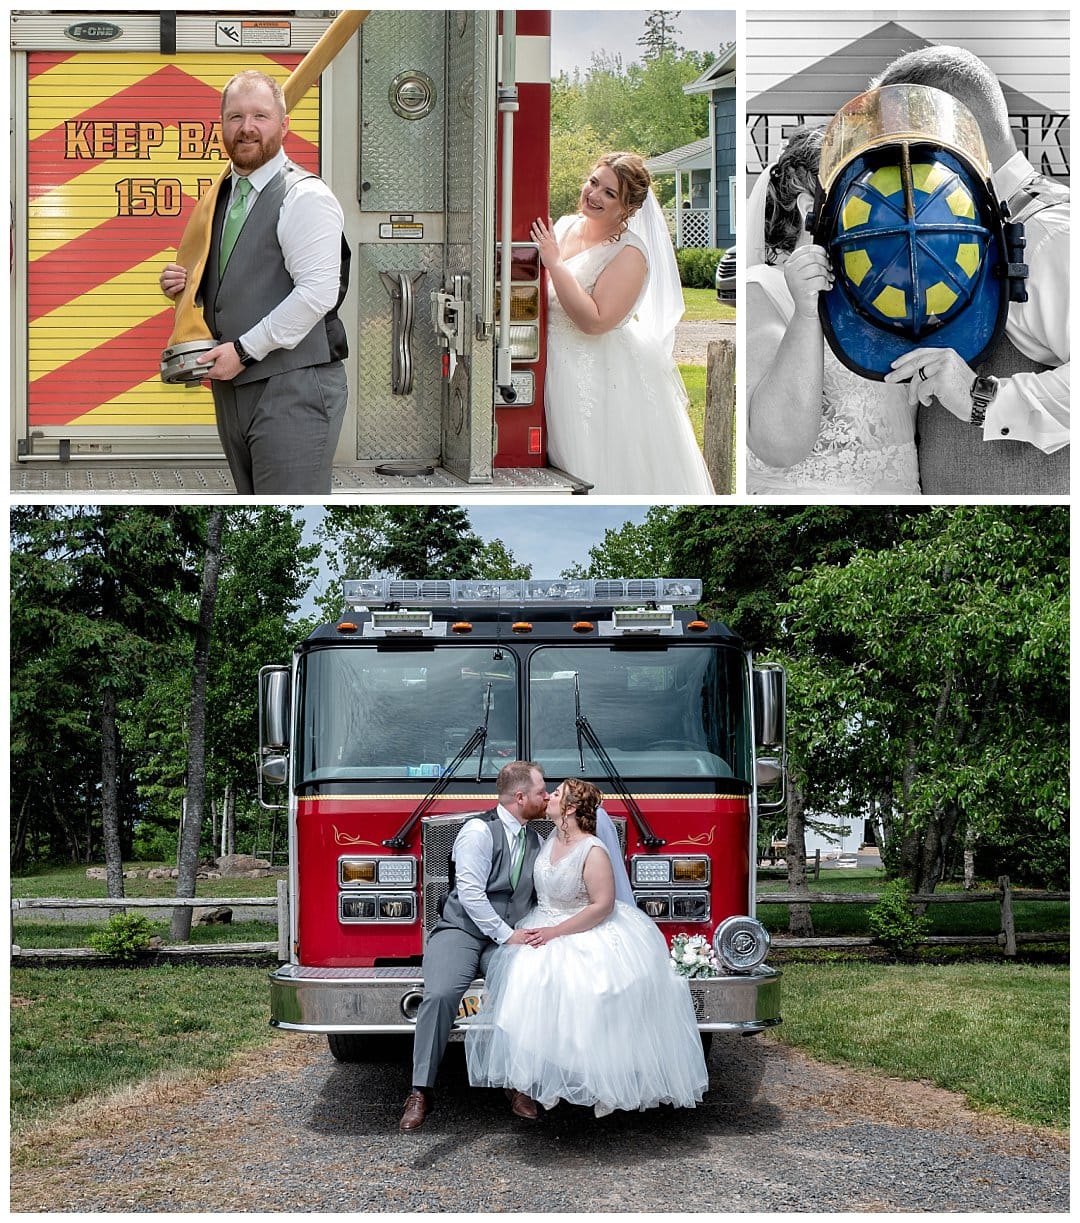 The bride and groom fire fighters take fun wedding photos with the fire truck at Healy Farm in NS.